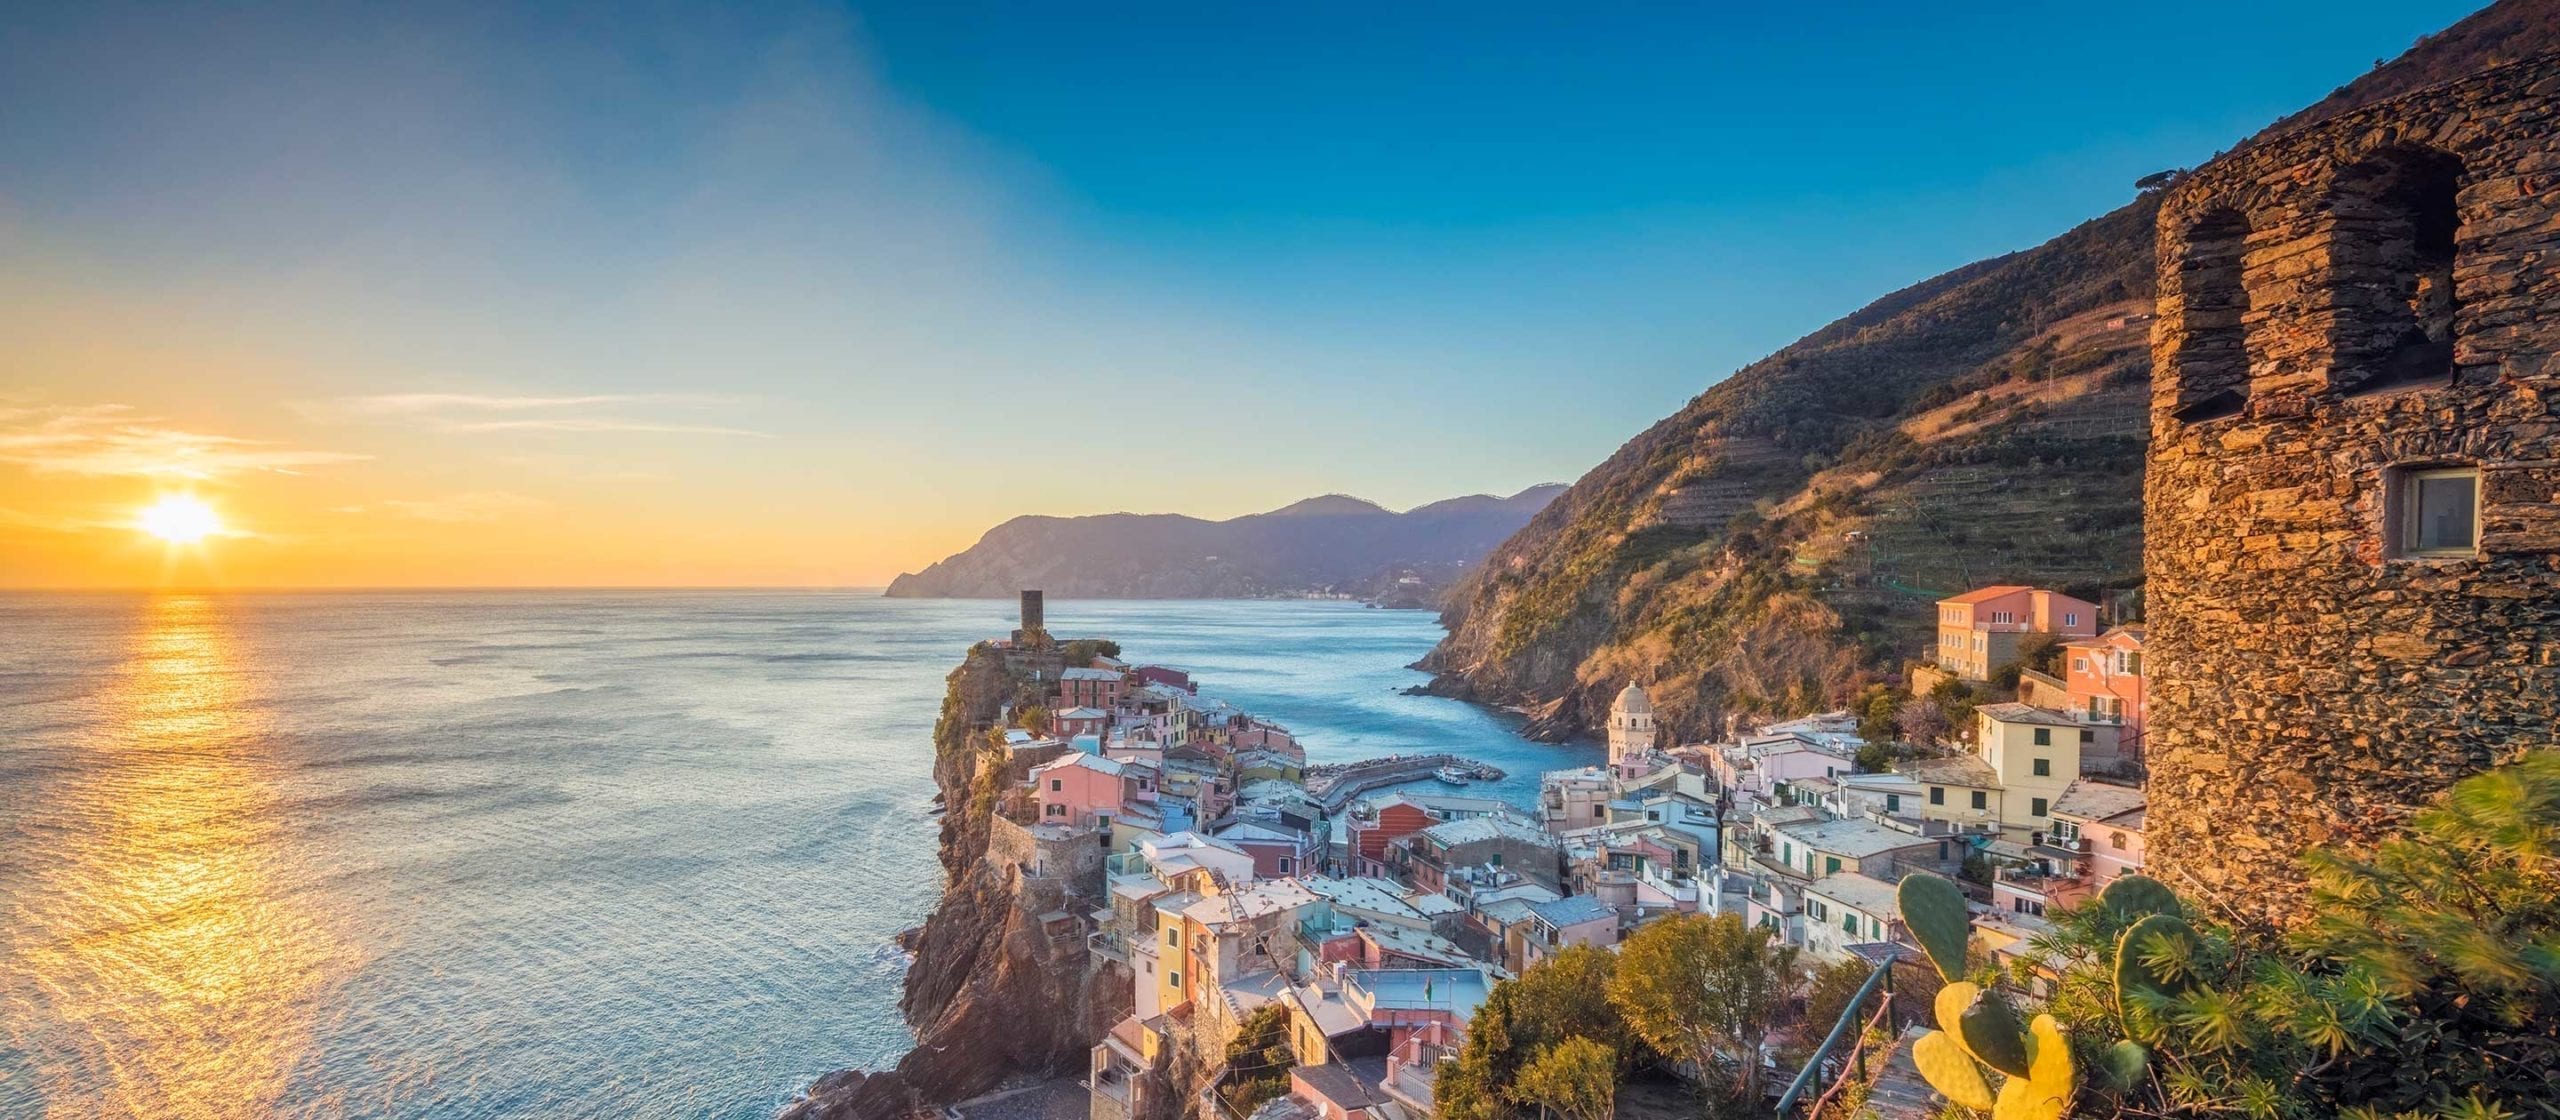 Vernazza at sunset, Cinque Terre National Park, Ligurian Riviera, Italy